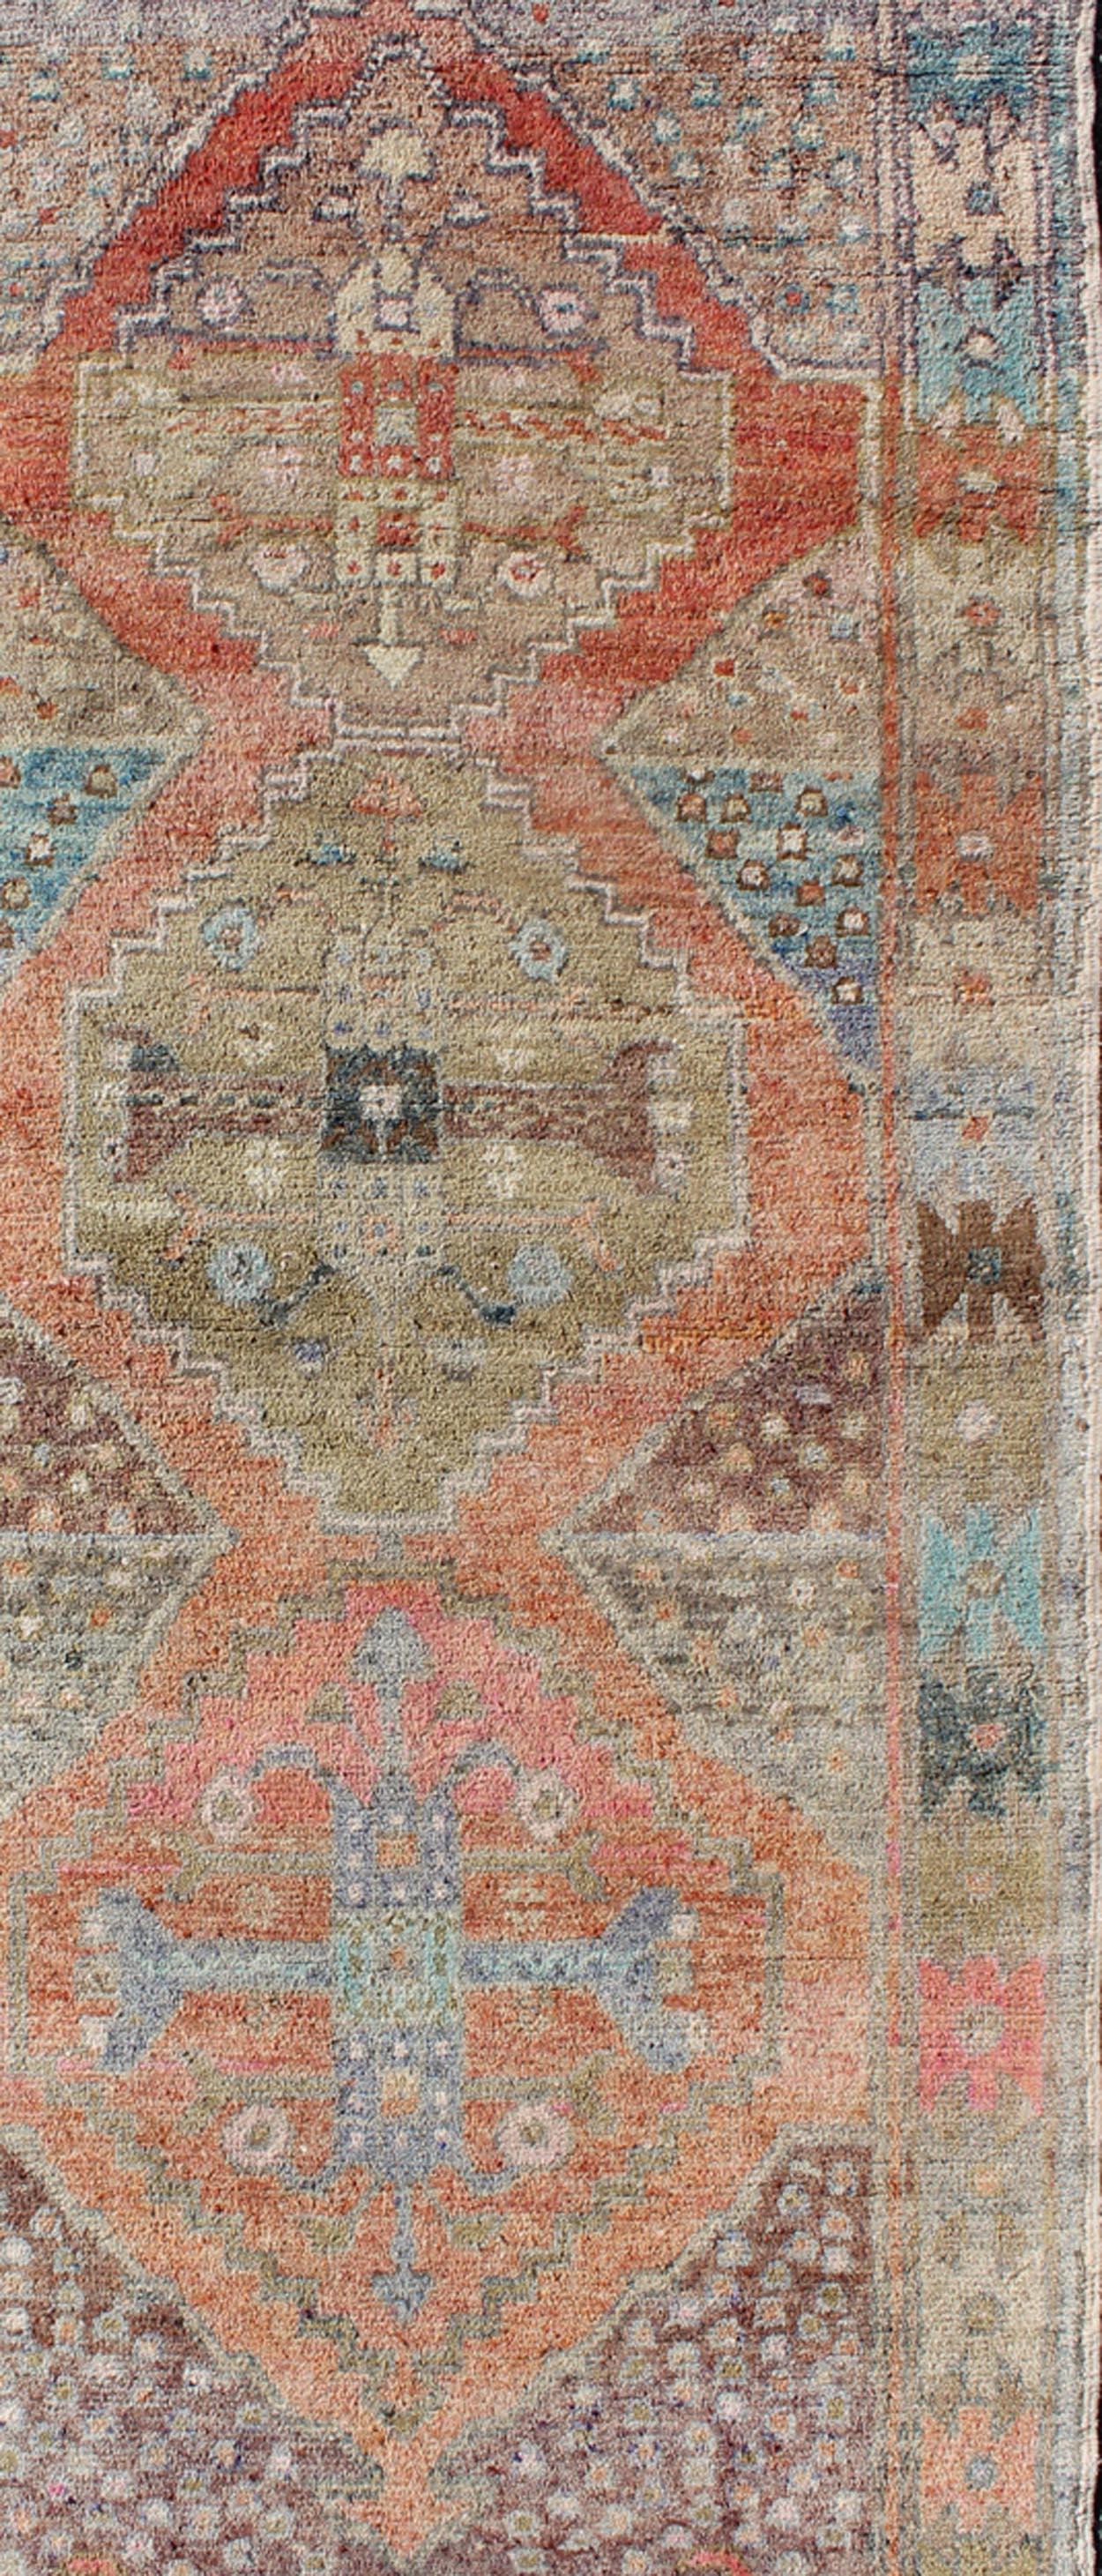 Amazingly Beautiful antique Oushak runner with Geometric Medallion Design, rug EN-165772 , country of origin / type: Turkey / Oushak, circa 1930

The painting like color composition of this short antique Turkish Oushak runner is very unique as one